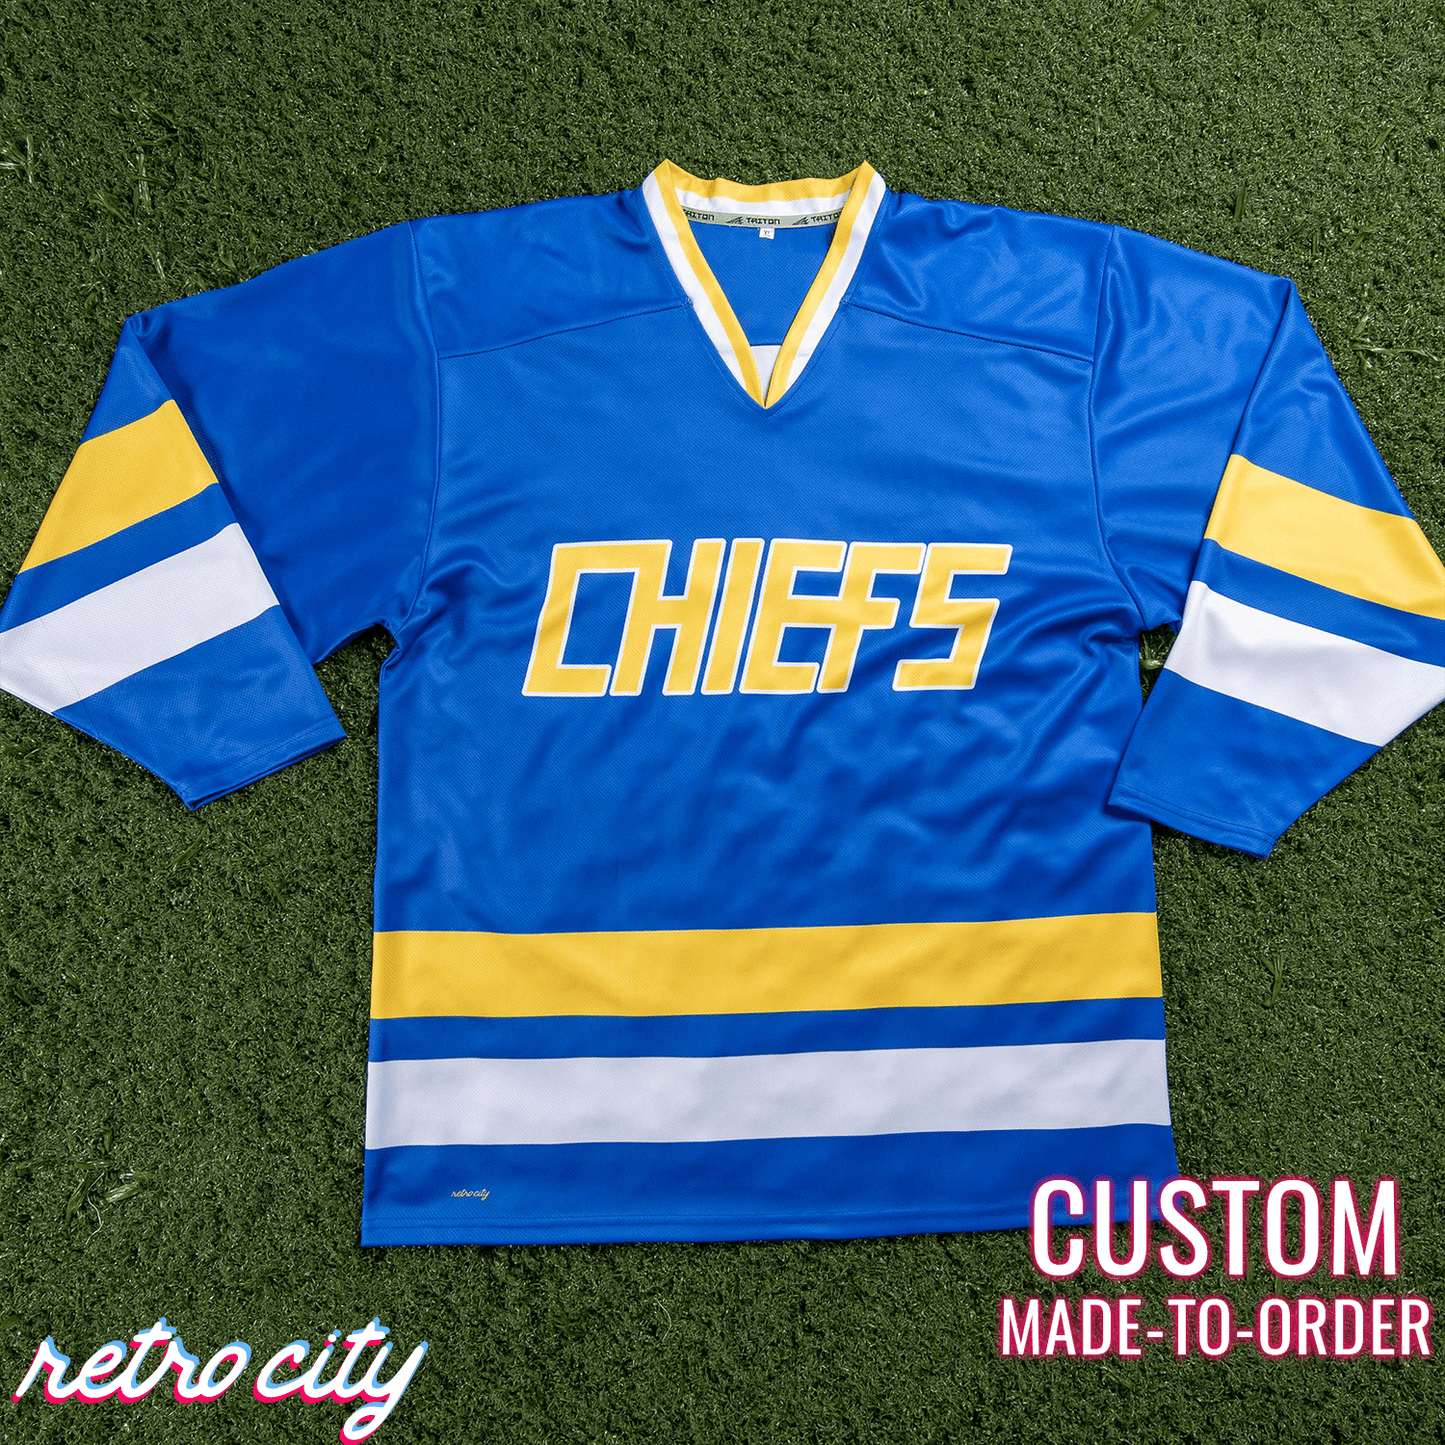 Chiefs Custom Name & Number Jersey - All Stitched